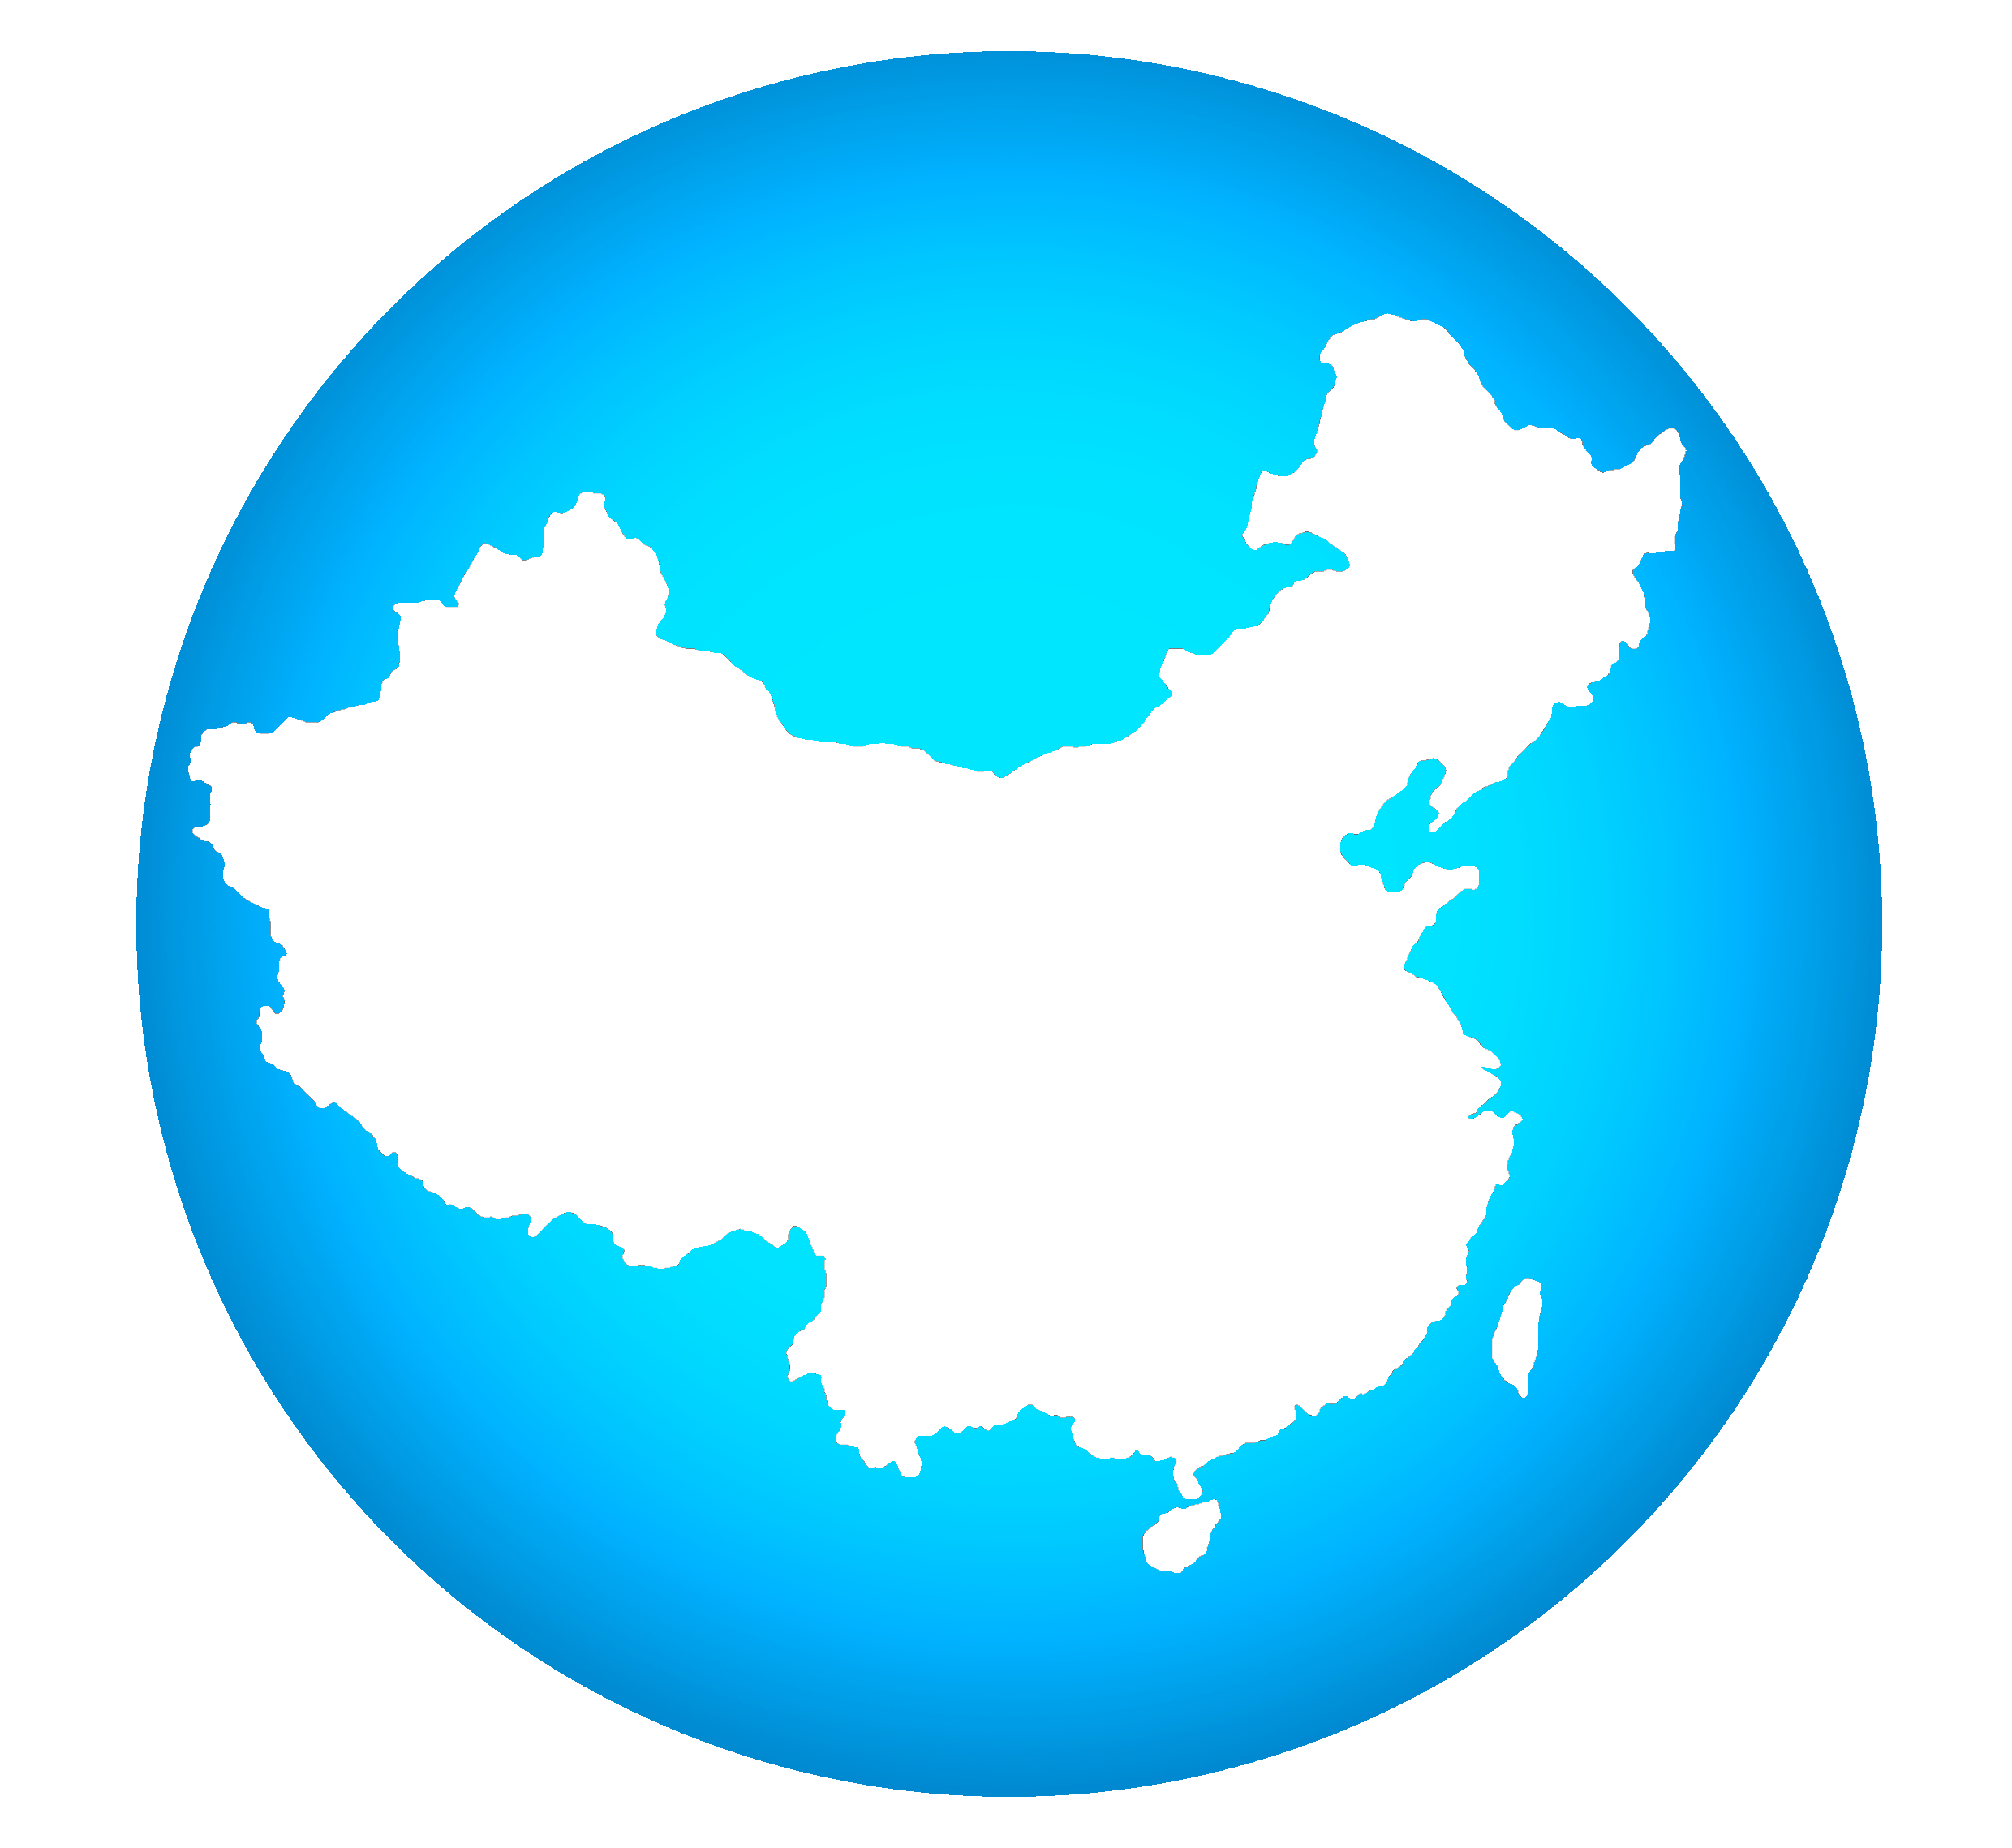 China map silhouette free download